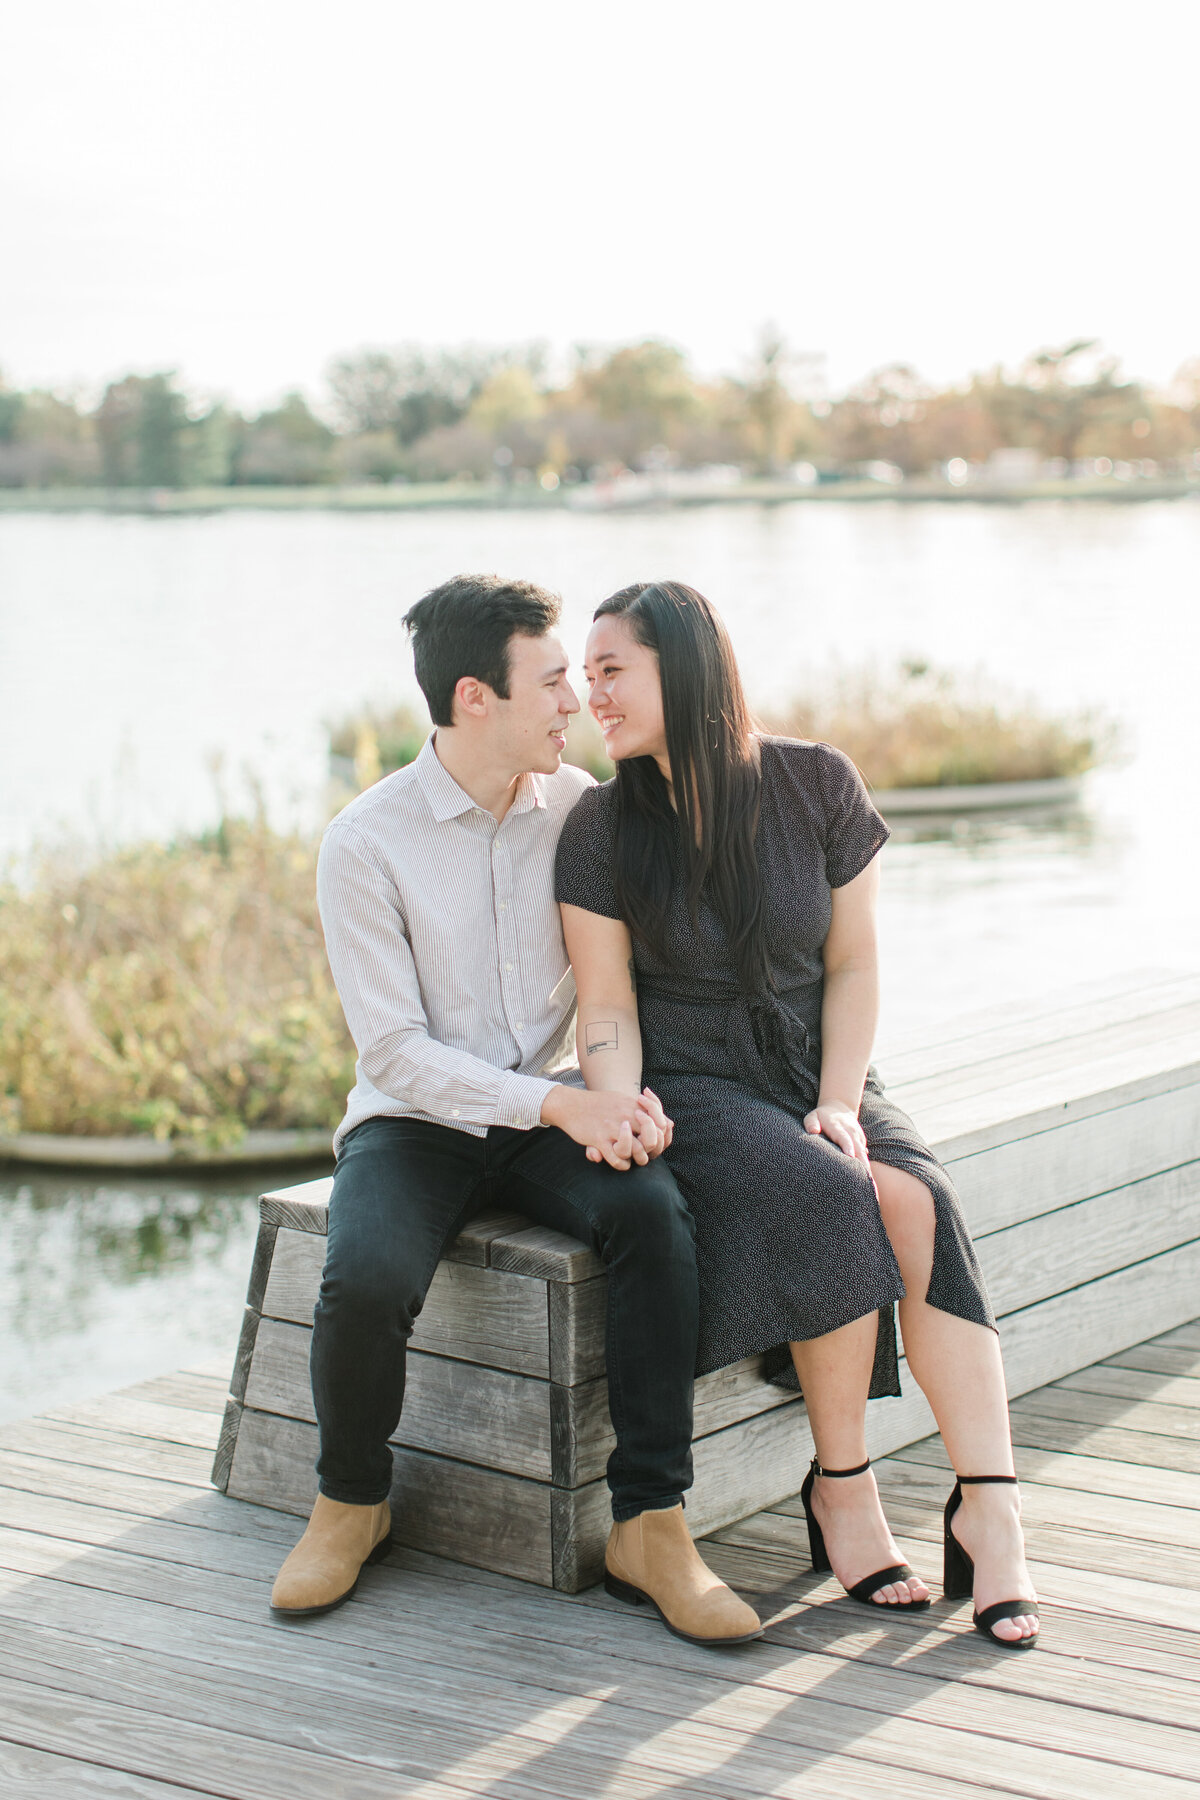 Becky_Collin_Navy_Yards_Park_The_Wharf_Washington_DC_Fall_Engagement_Session_AngelikaJohnsPhotography-7519